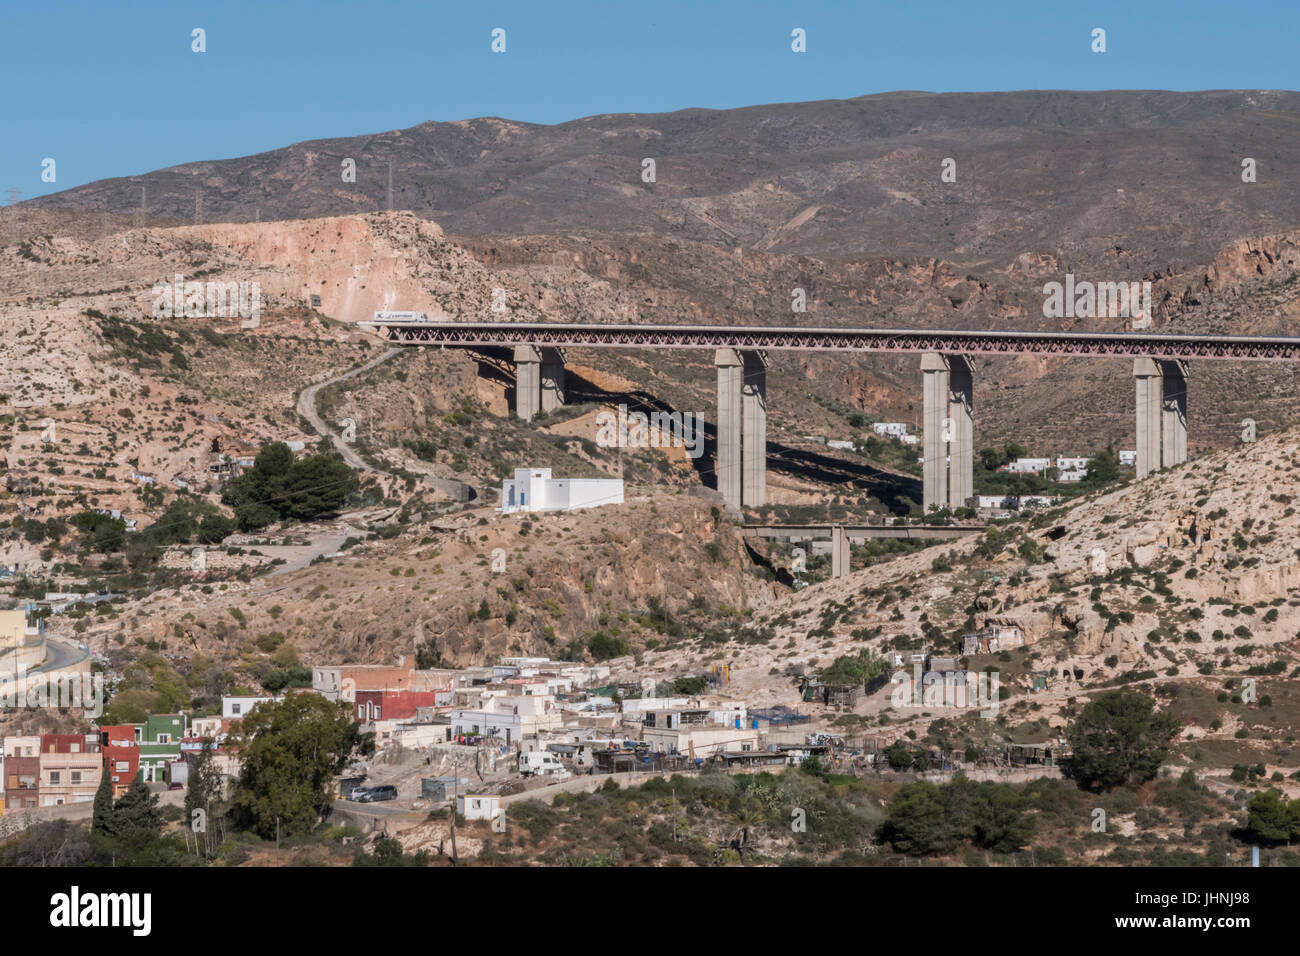 Bridges and roads over the mountains in almeria, Andalucia, Spain Stock Photo